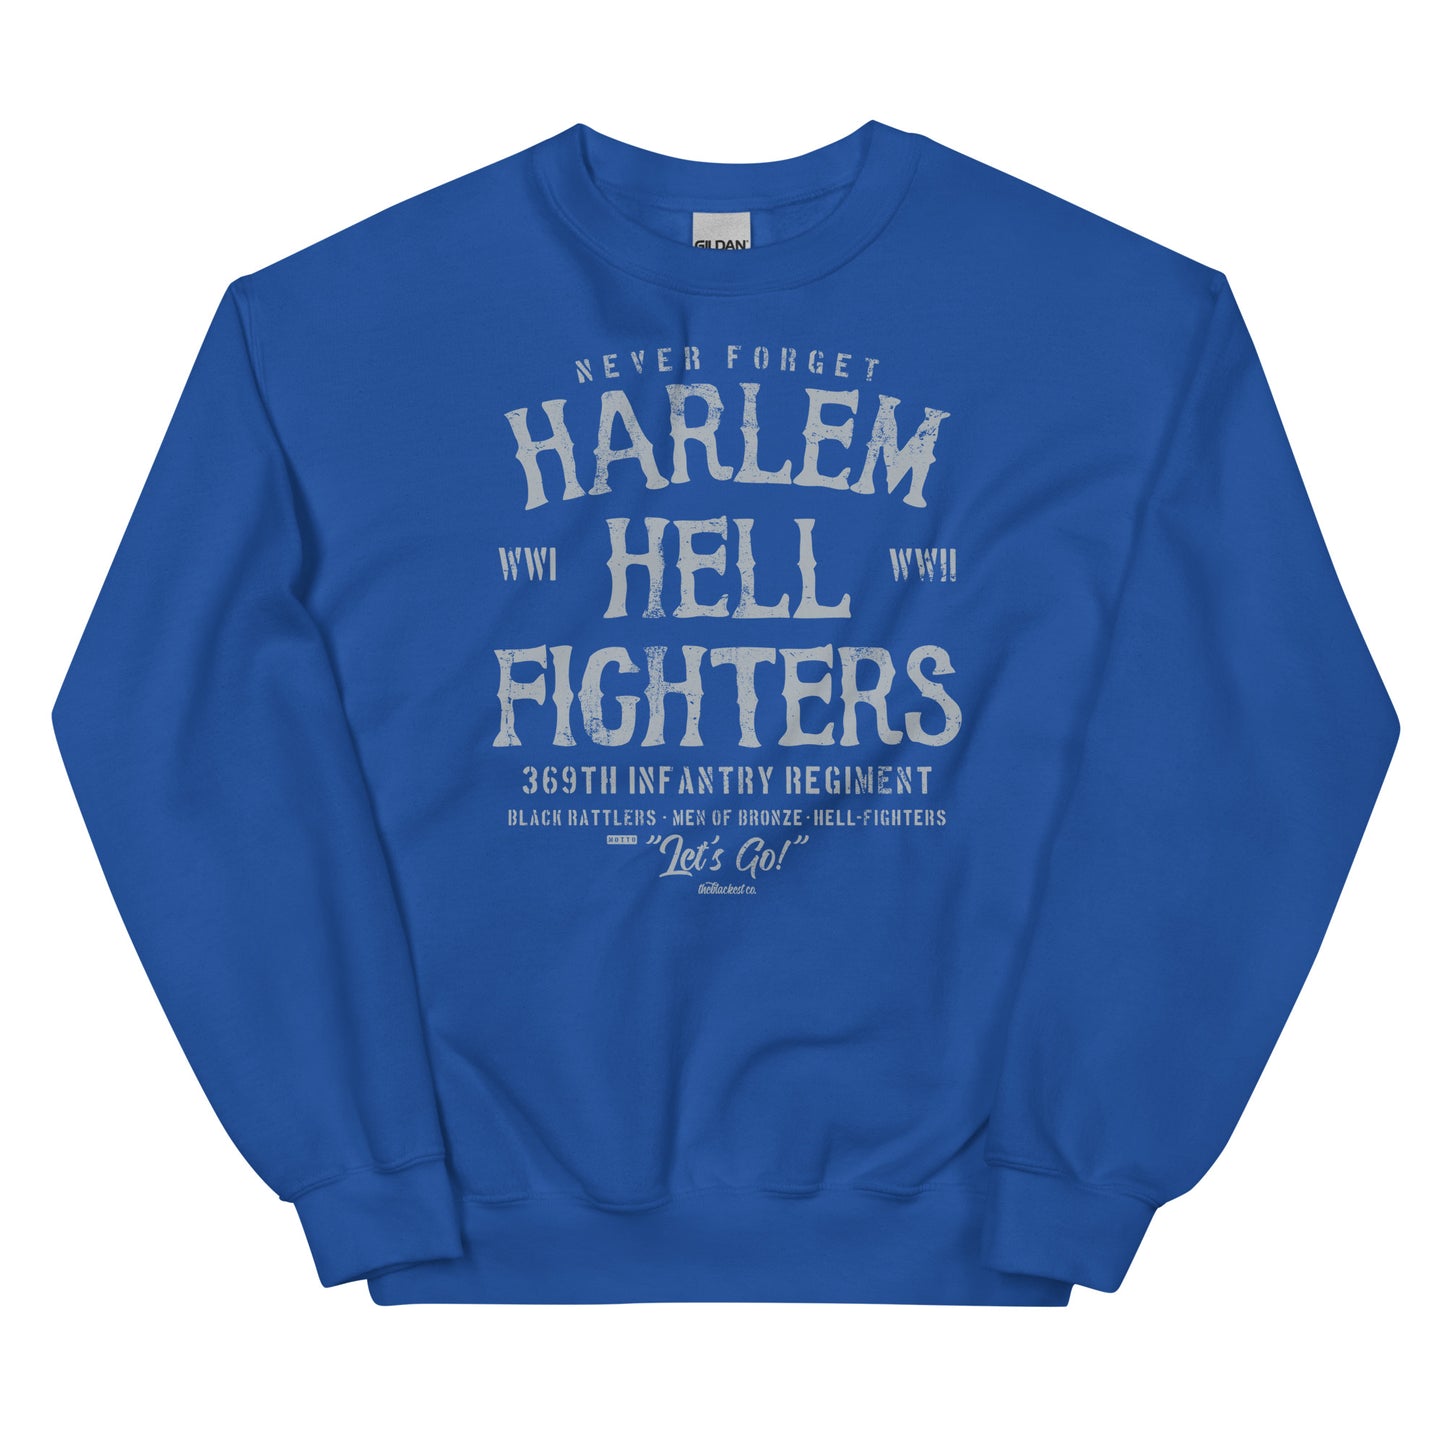 royal blue sweatshirt with white text reading harlem hellfighters